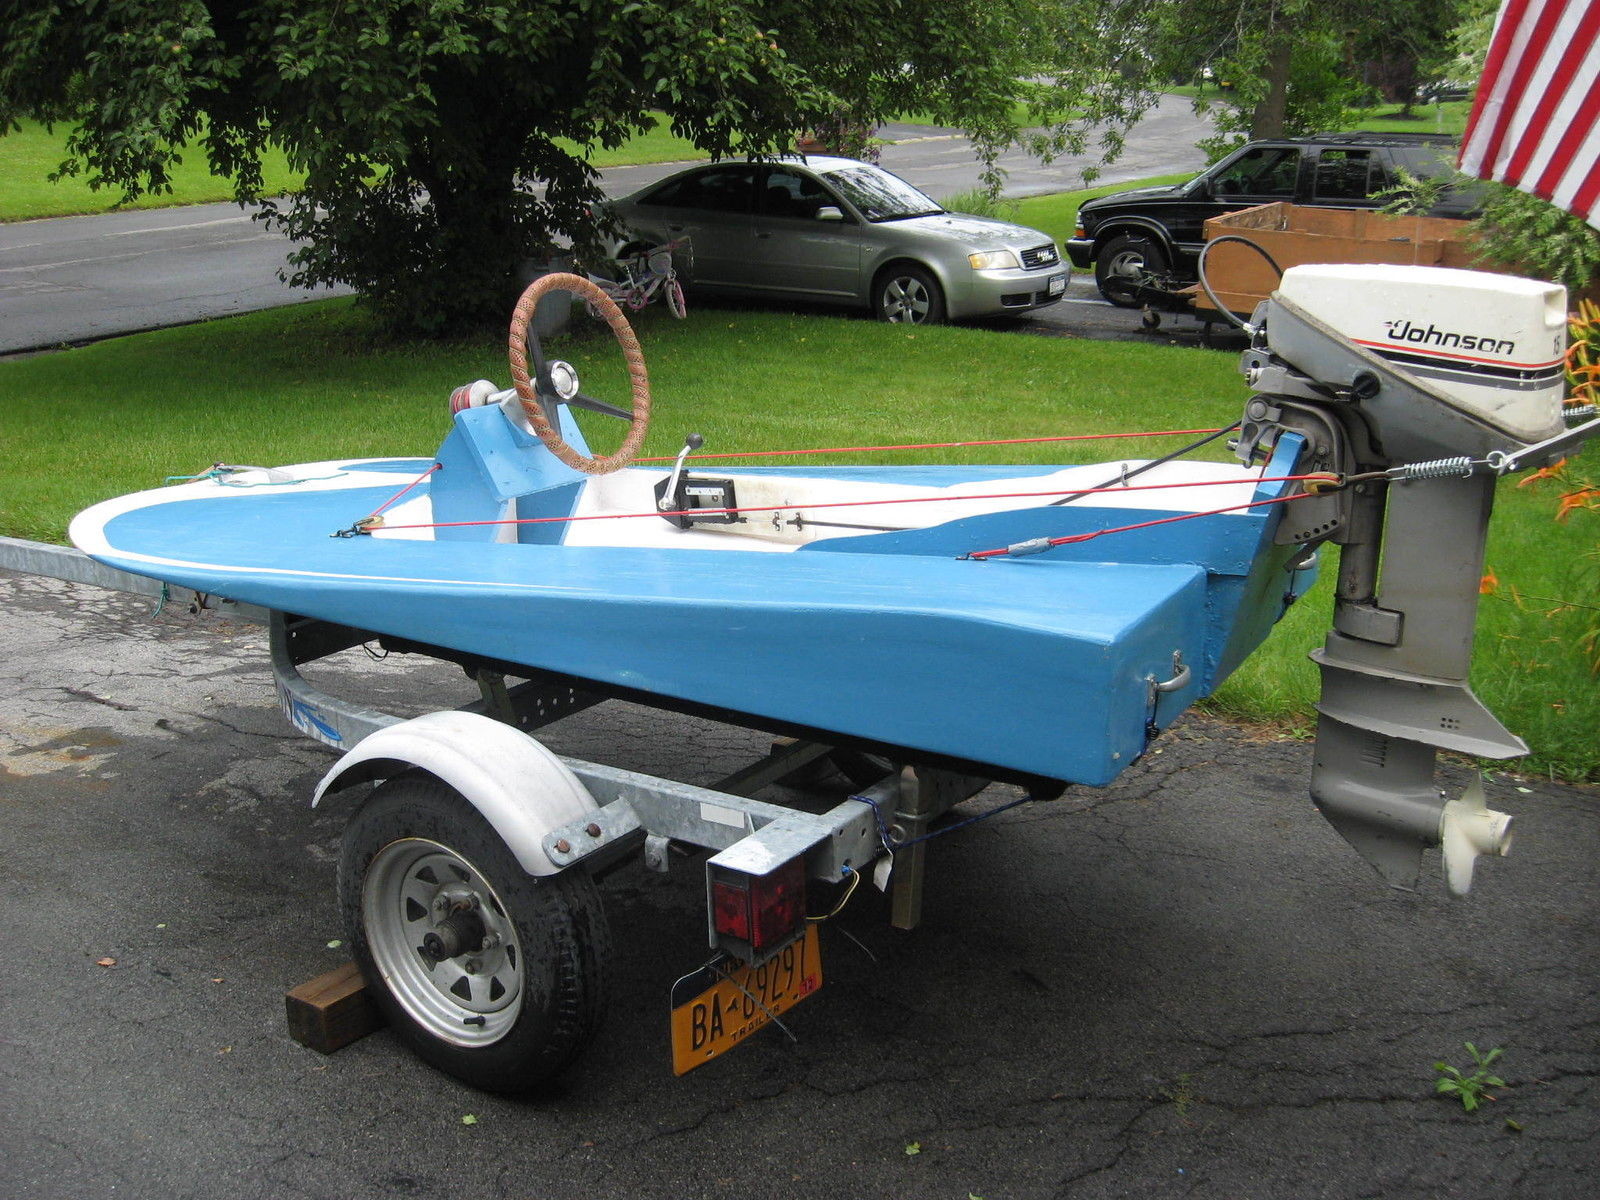 Home Built Mini Max Hydroplane 2010 for sale for $550 ...